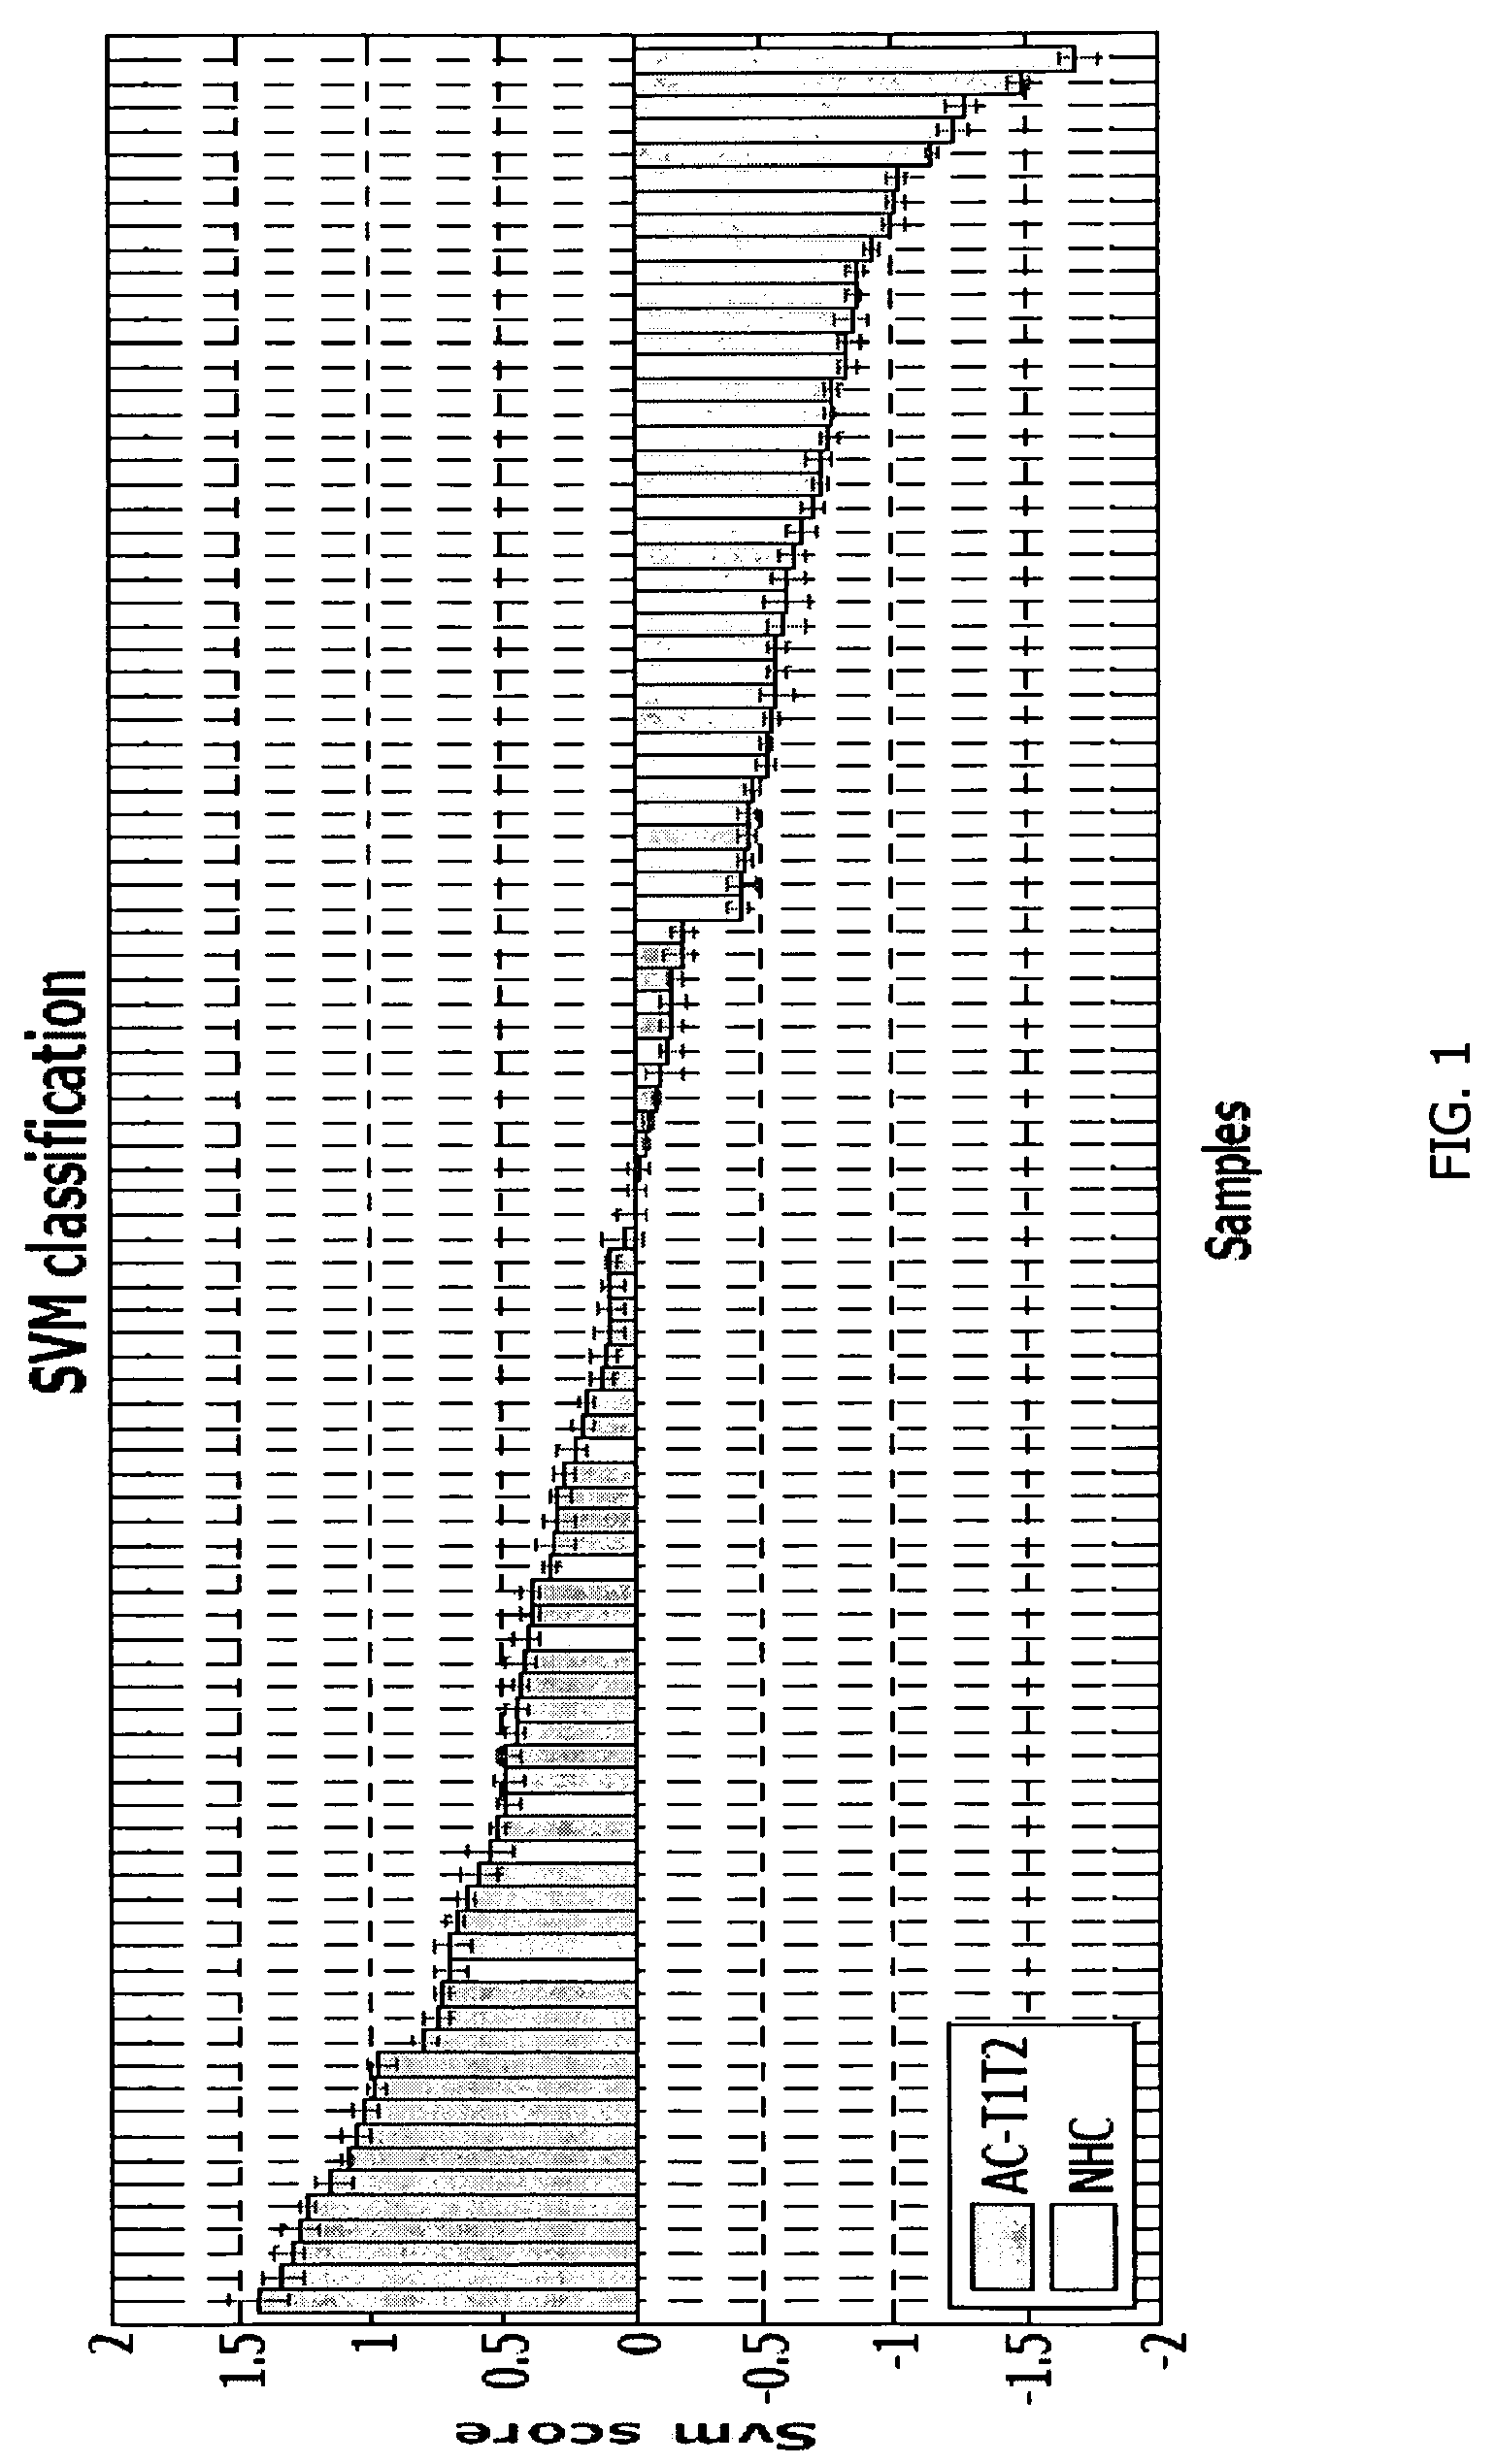 Method for diagnosing lung cancers using gene expression profiles in peripheral blood mononuclear cells